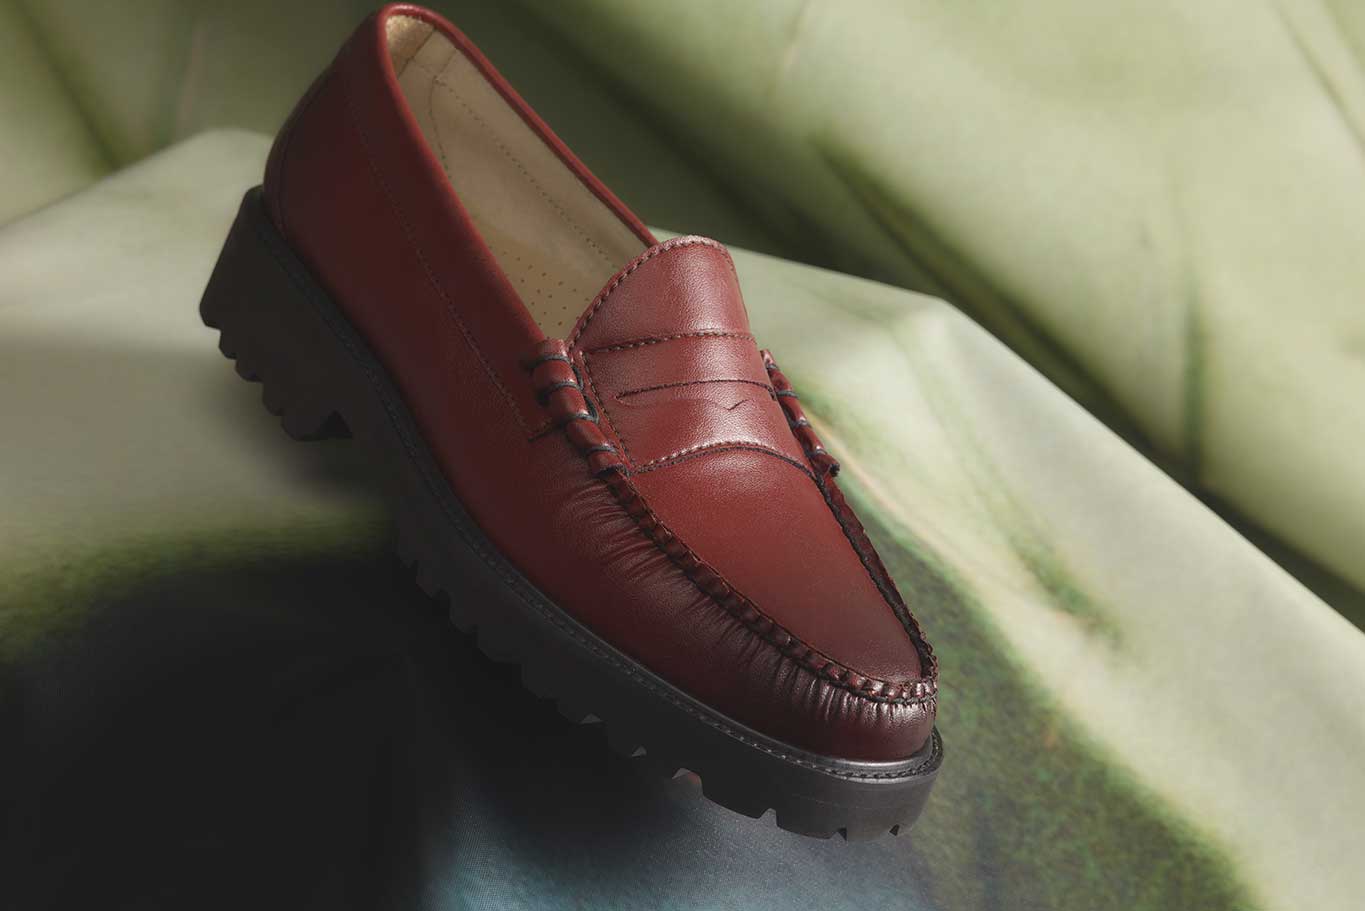 Introducing our first vegan leather loafers – G.H.BASS